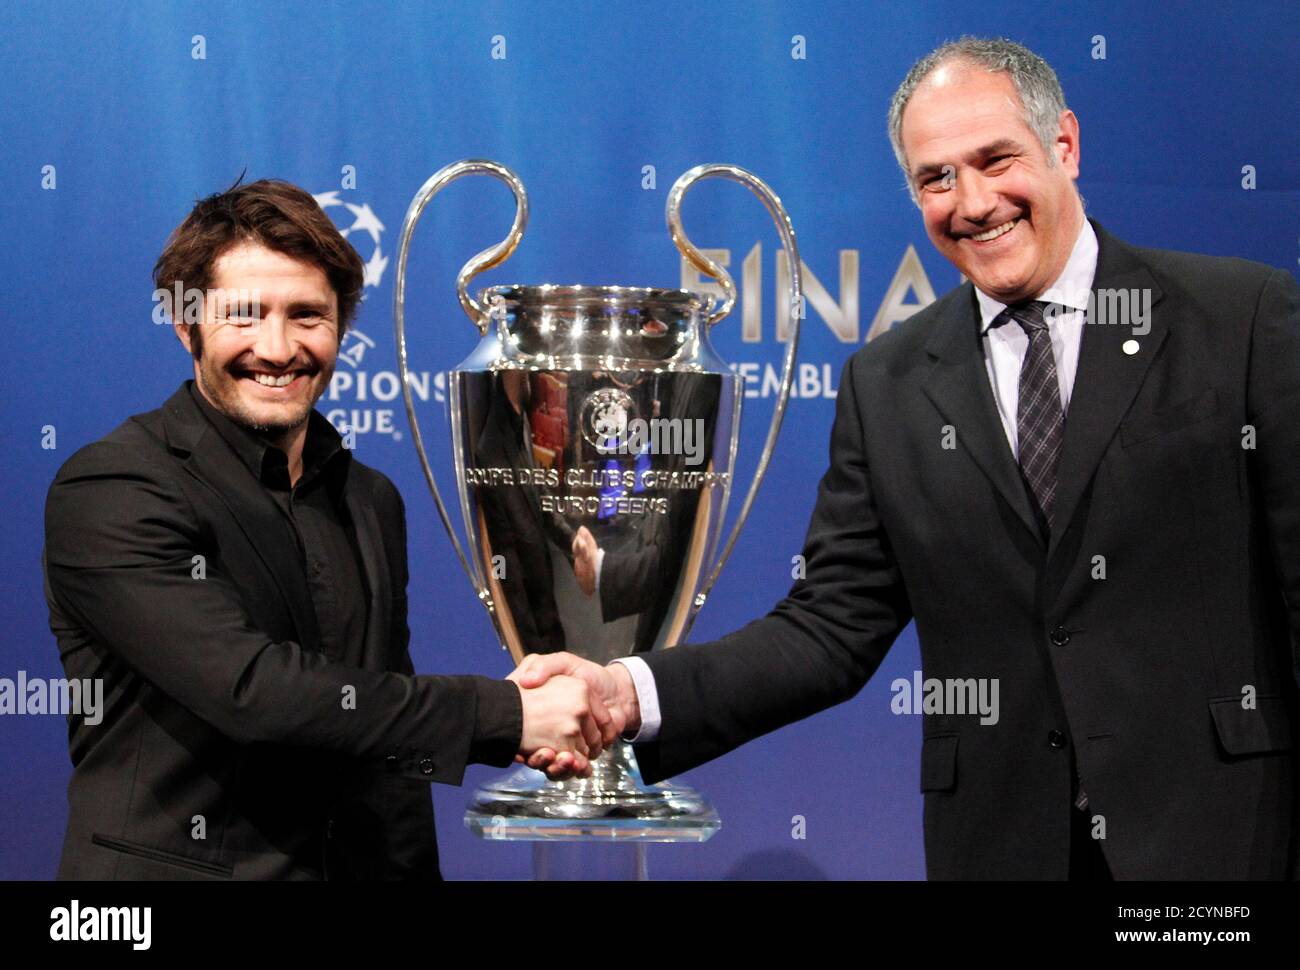 FC Bayern Munich former player Bixente Lizarazu (L) shakes hand with FC Barcelona Director of Professional Football Andoni Zubizarreta after the draw for the Champions League semi-finals matches at the UEFA headquarters in Nyon, April 12, 2013. REUTERS/Denis Balibouse (SWITZERLAND - Tags: SPORT SOCCER) Stock Photo